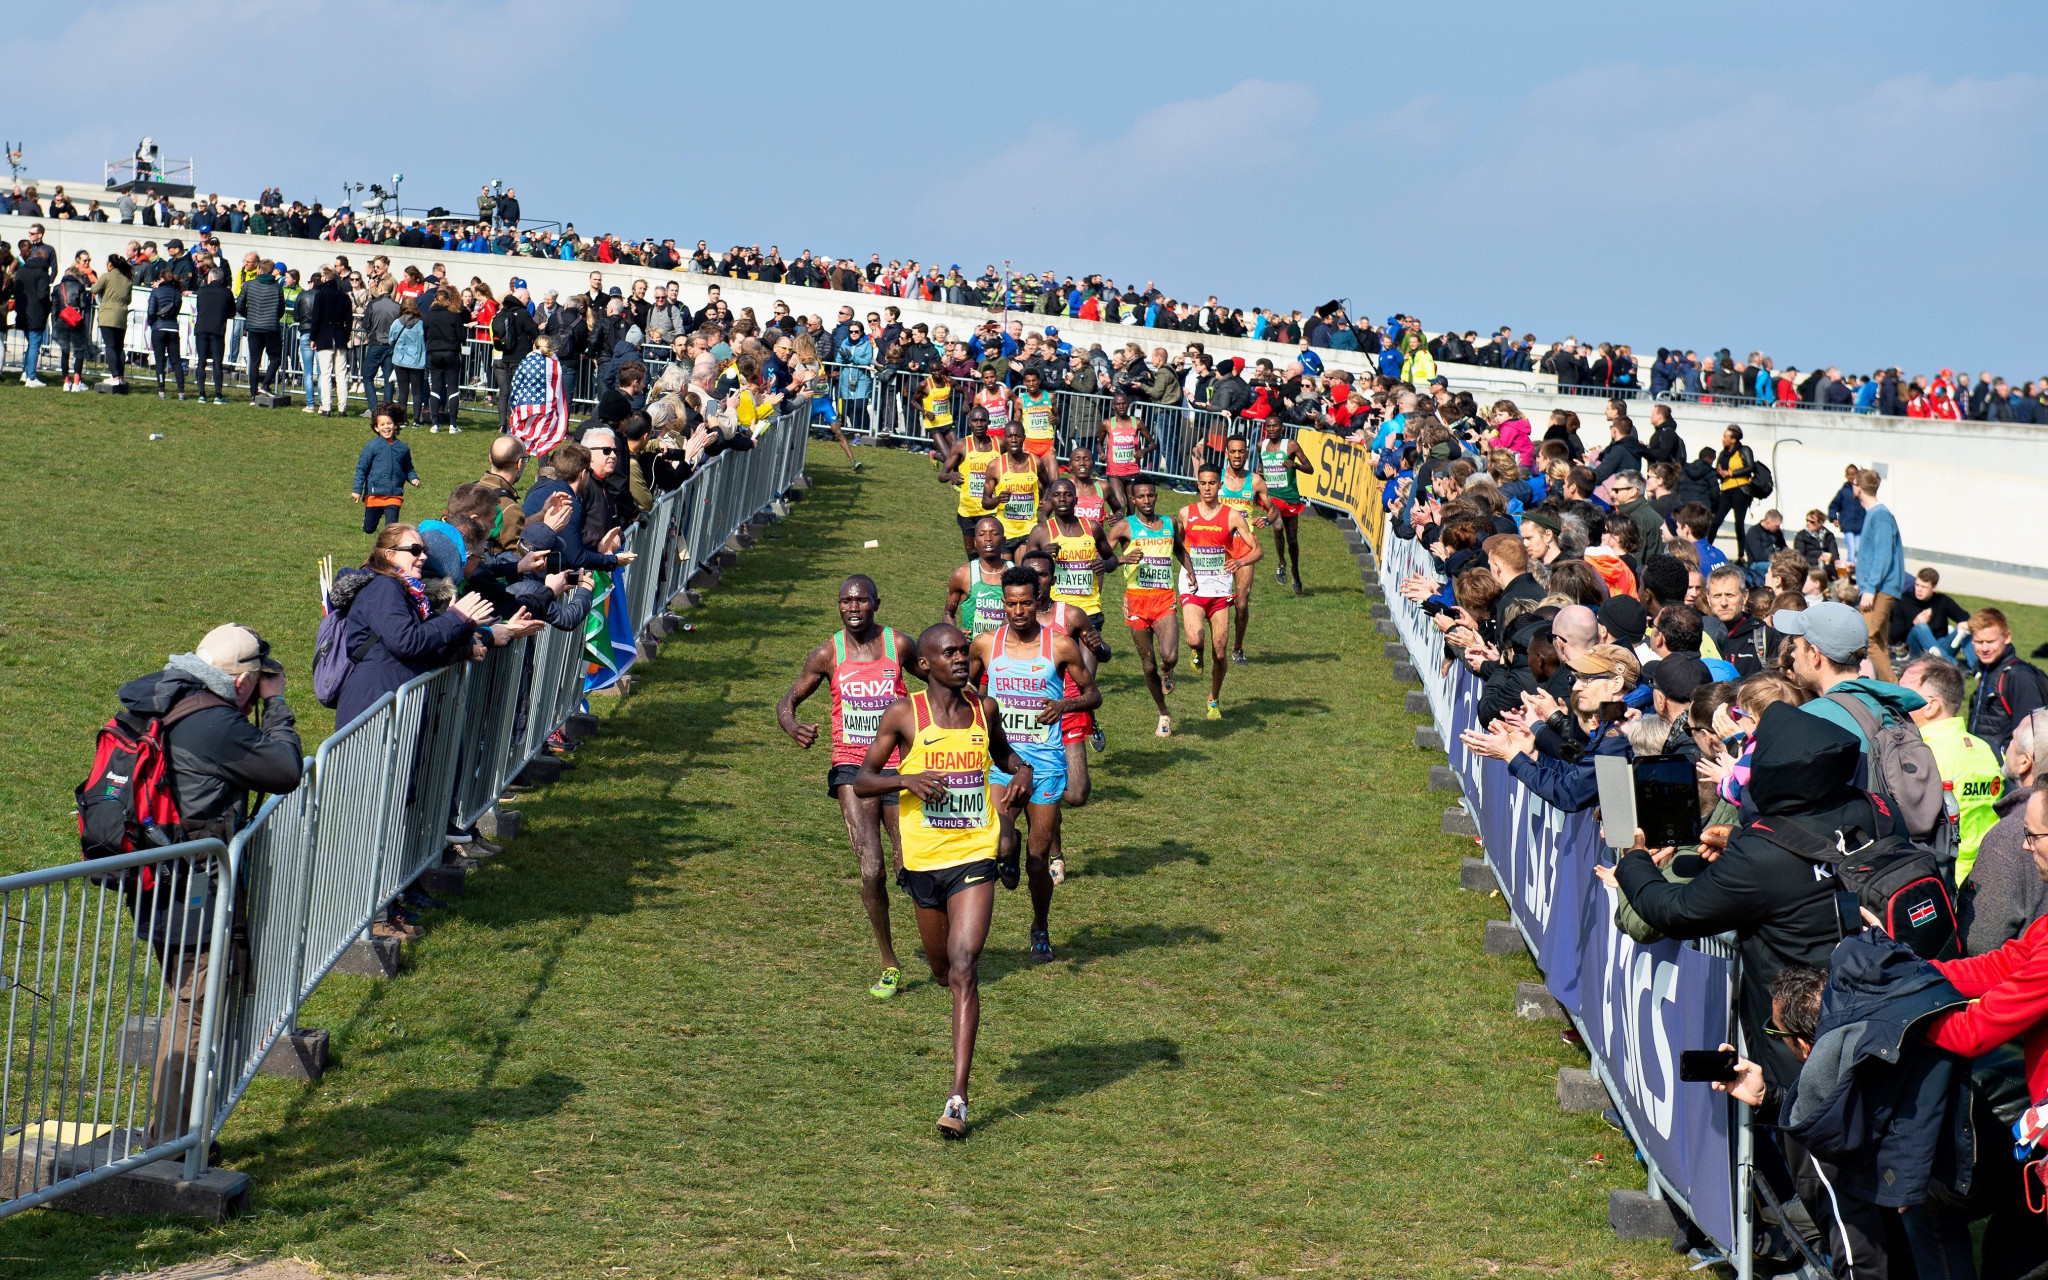 Aarhus staged the 2019 World Cross Country Championships and is looking to attract similar events in the future ©Getty Images